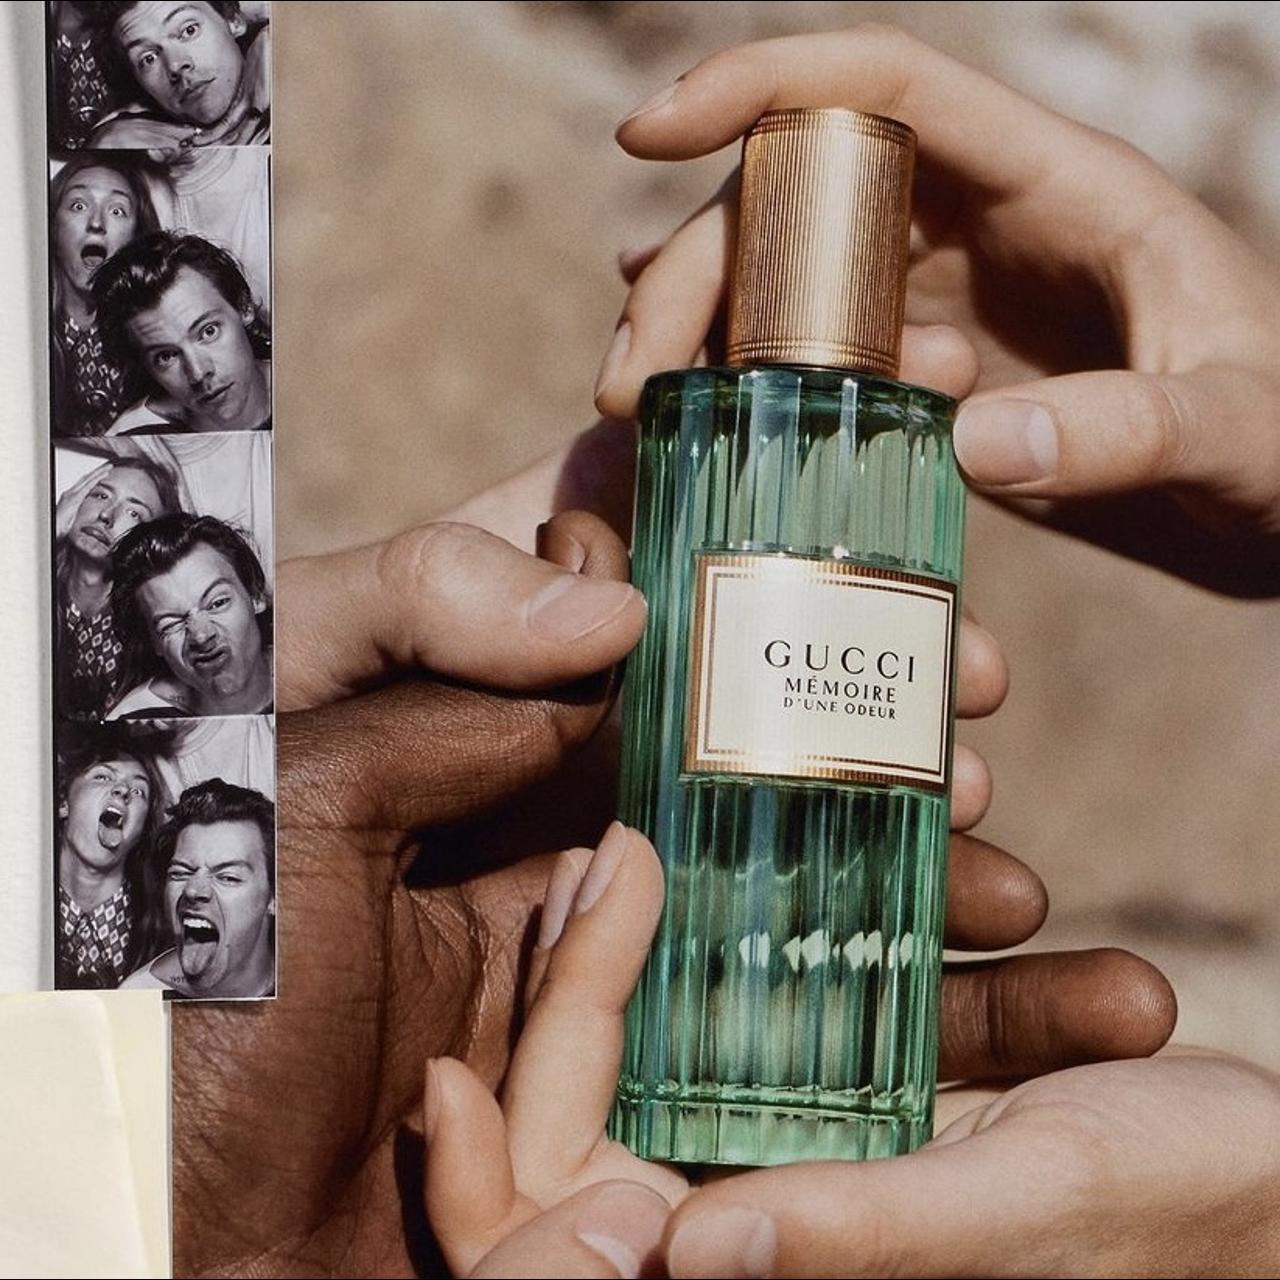 Gucci Blue and Green Fragrance (2)